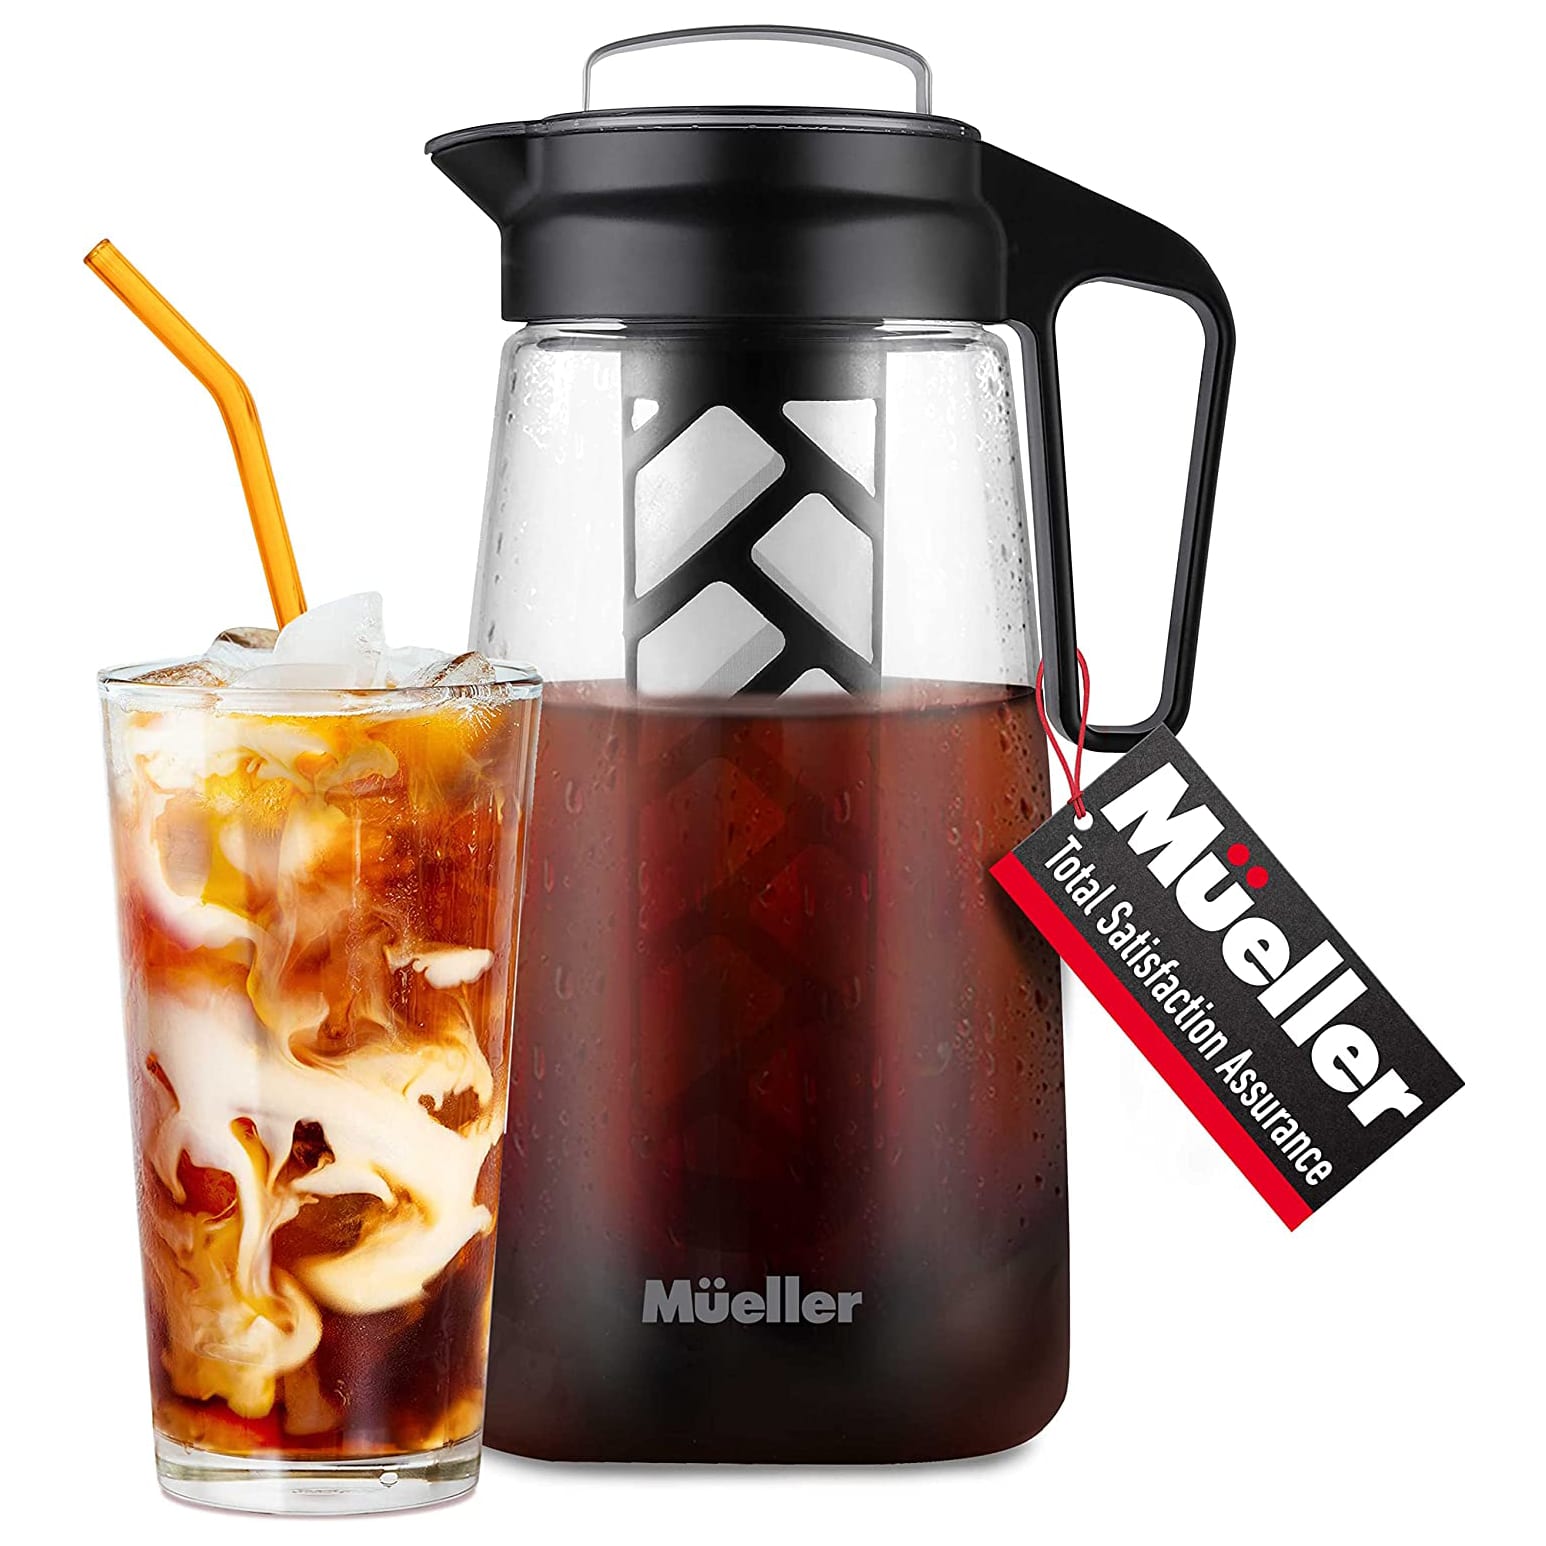 http://cdn.apartmenttherapy.info/image/upload/v1688408630/gen-workflow/product-database/mueller-cold-brew-coffee-maker-amazon.jpg